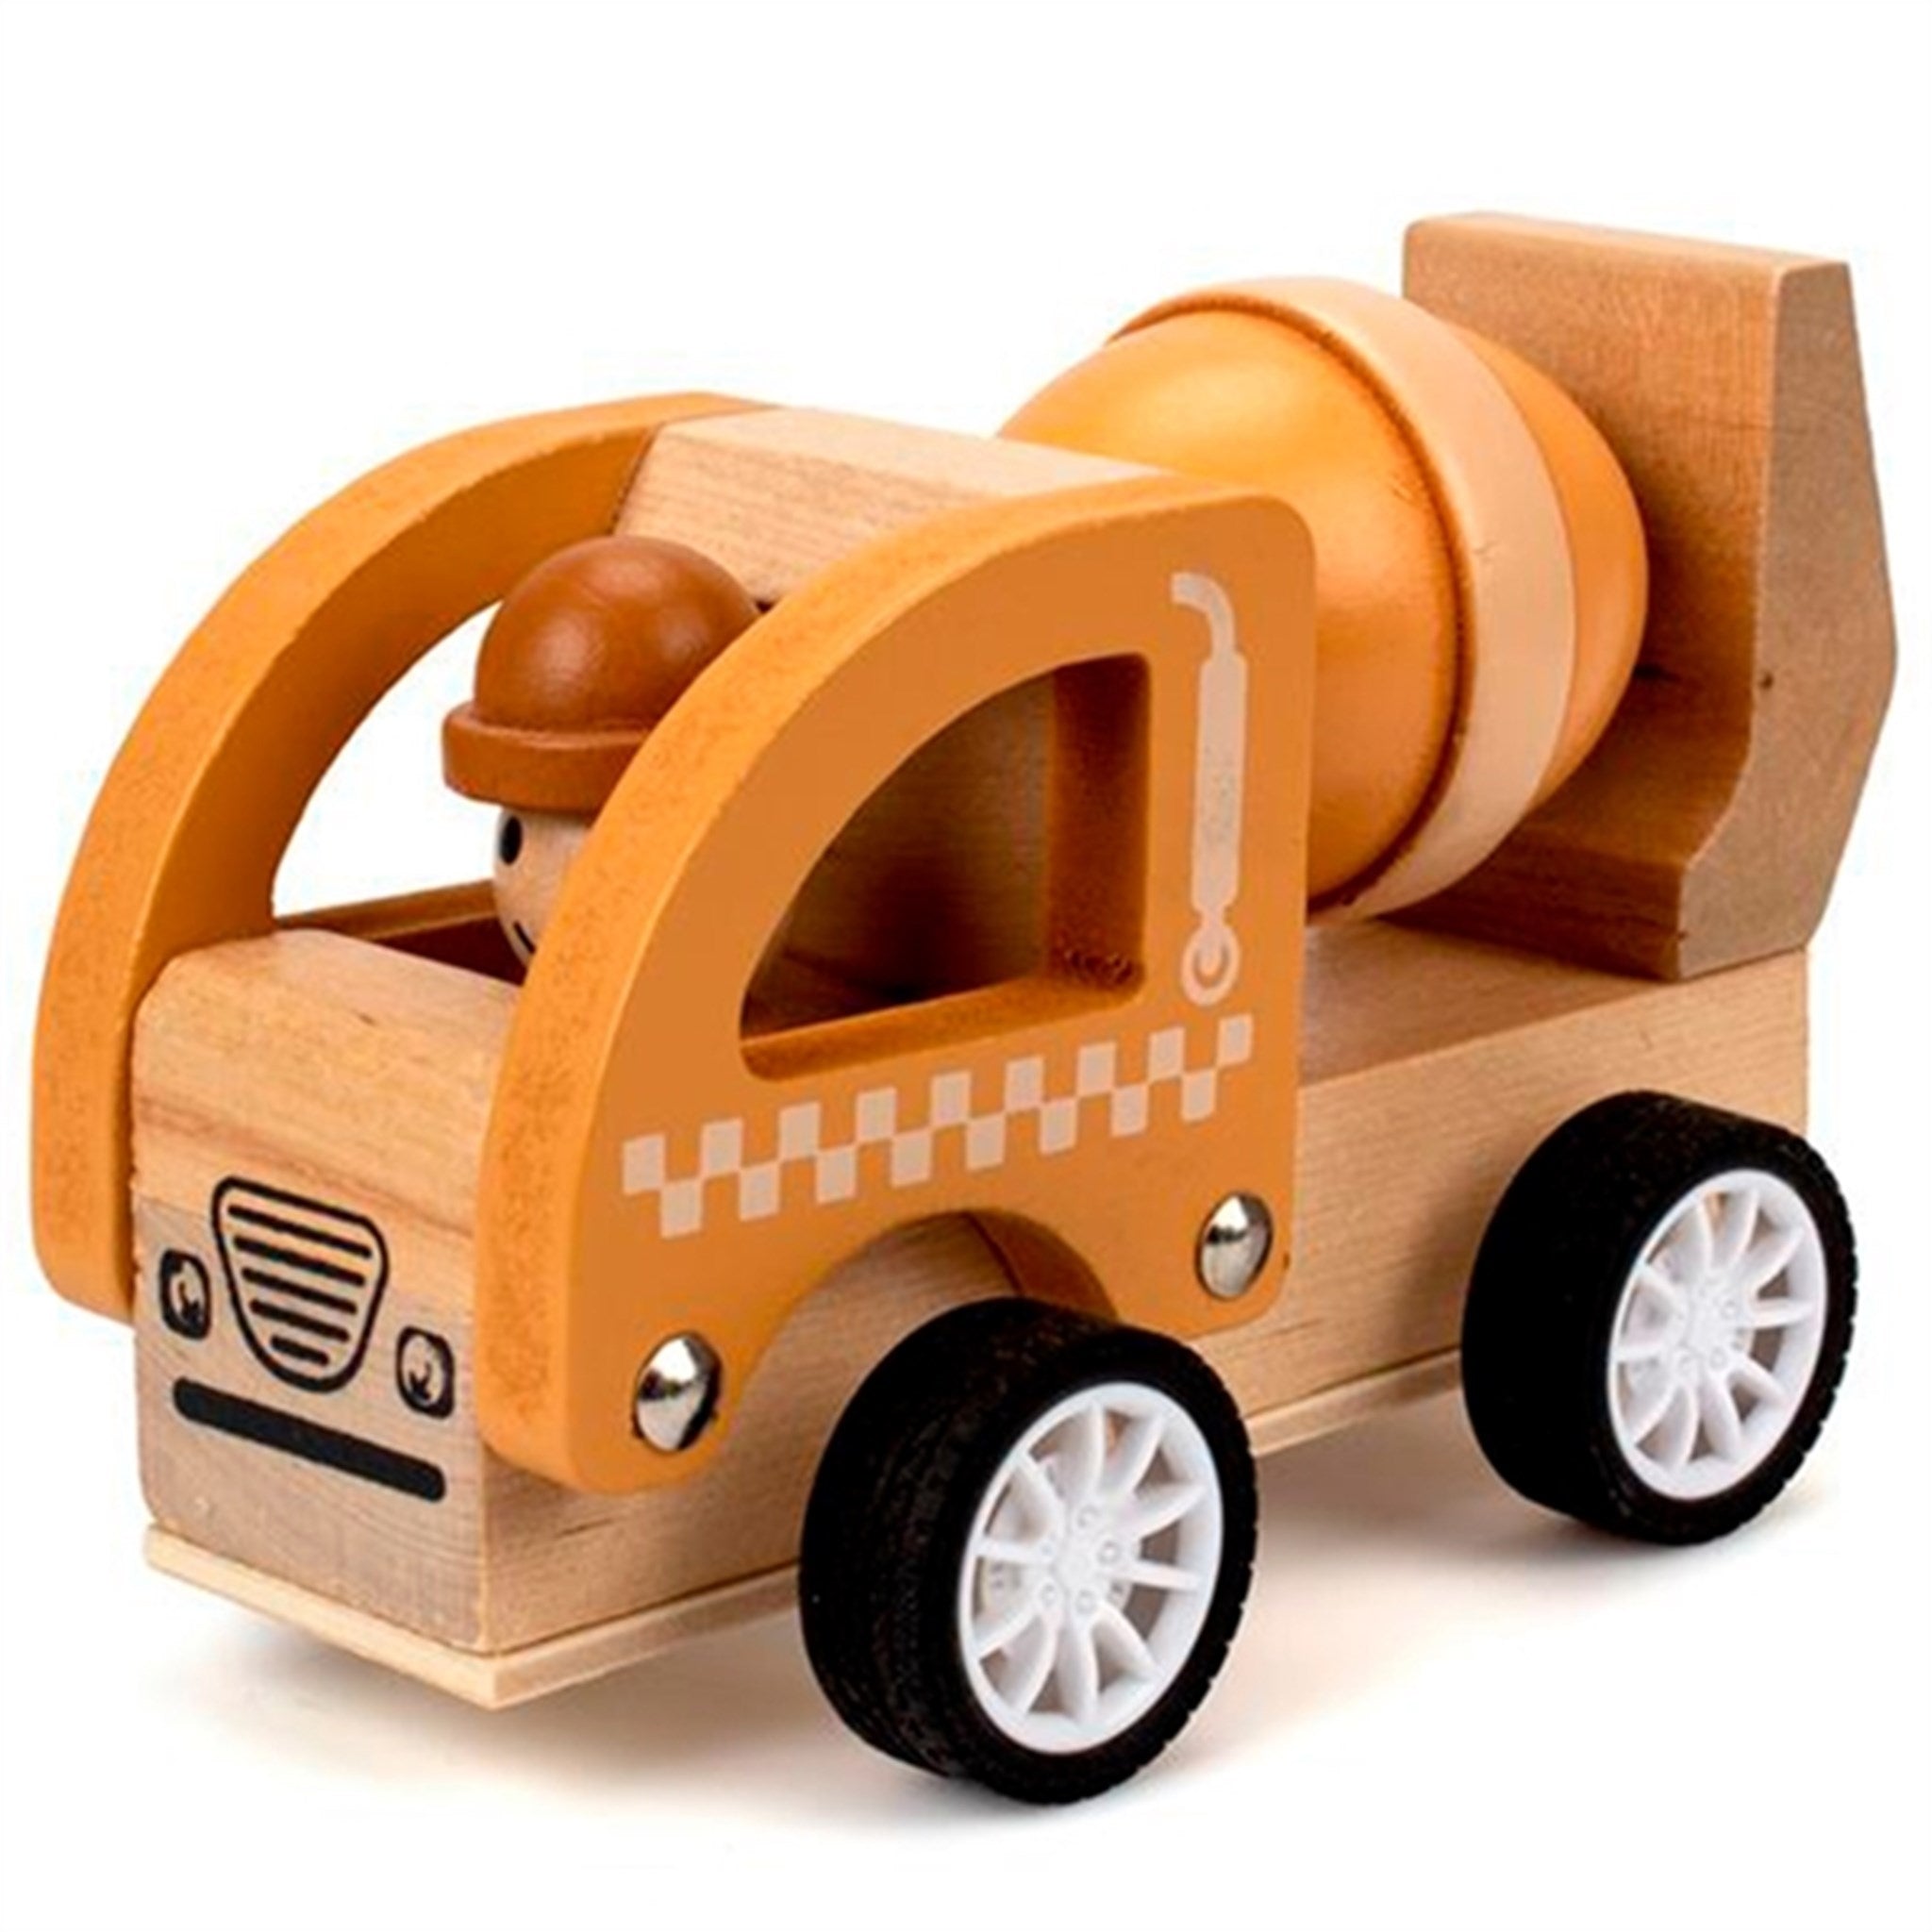 Magni Construction Vehicles with Pull-Back Cement Mixer Orange